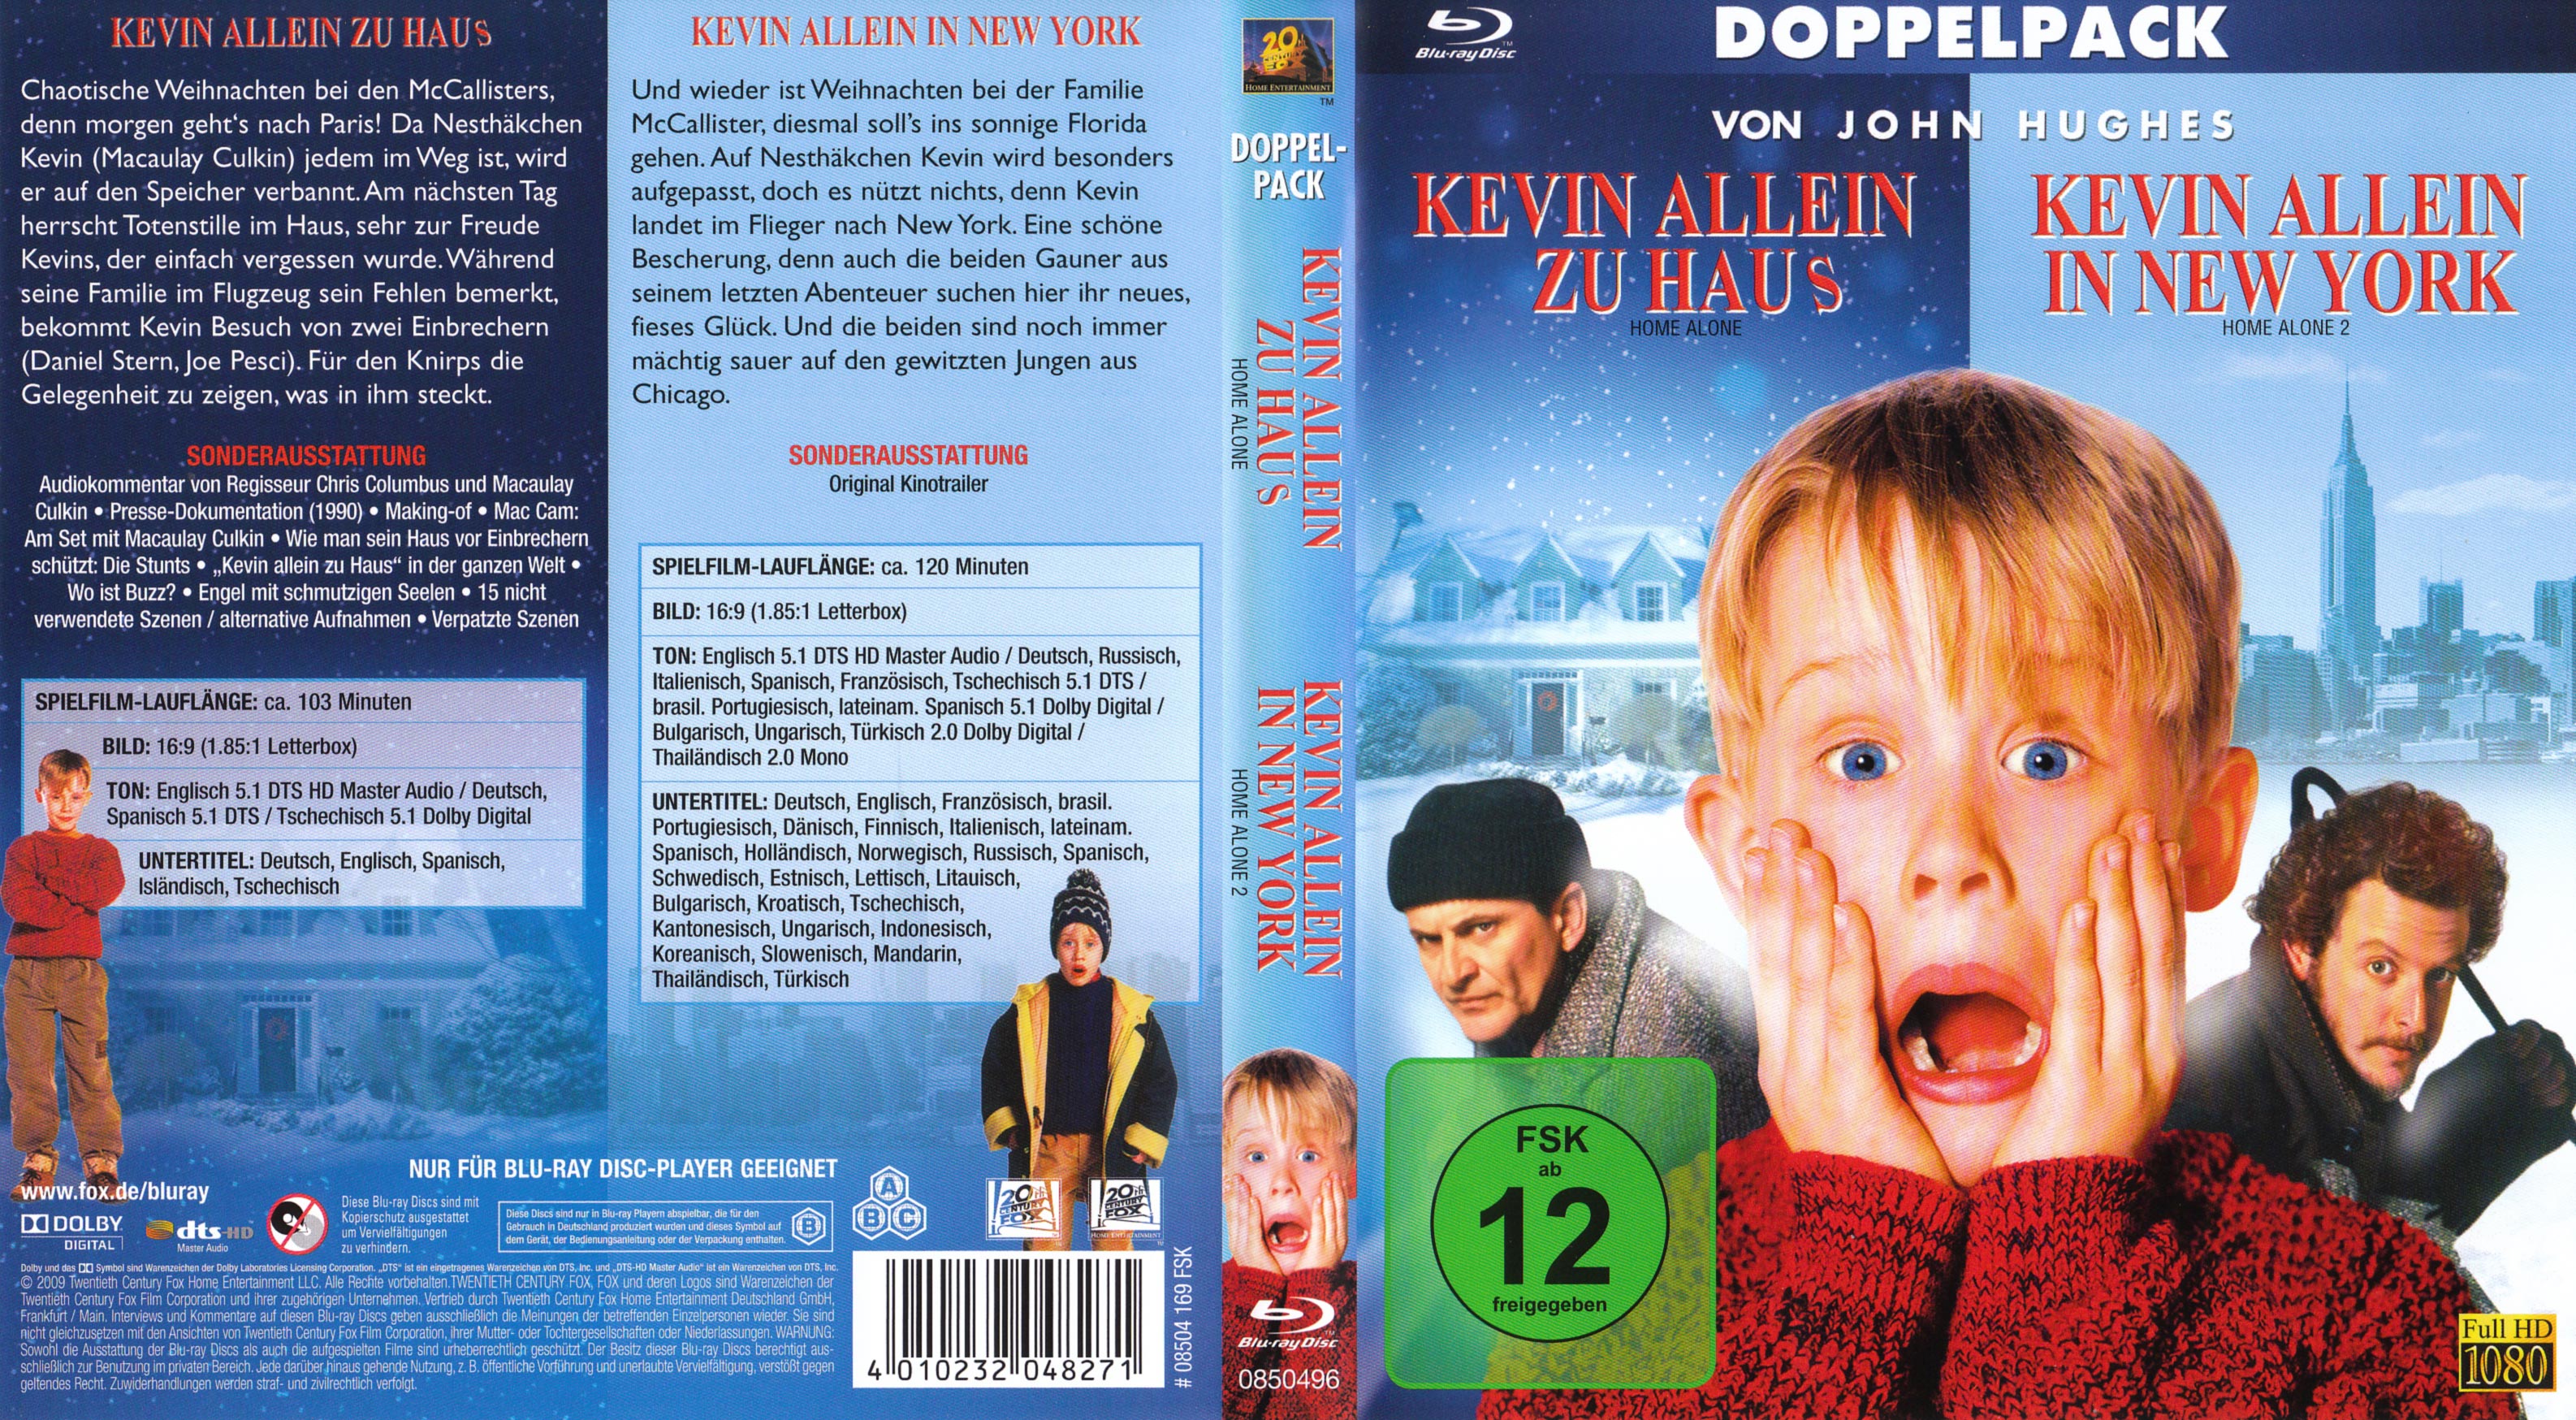 Kevin Allein zu Haus In New York Double Feature blu ray cover german | German DVD Covers